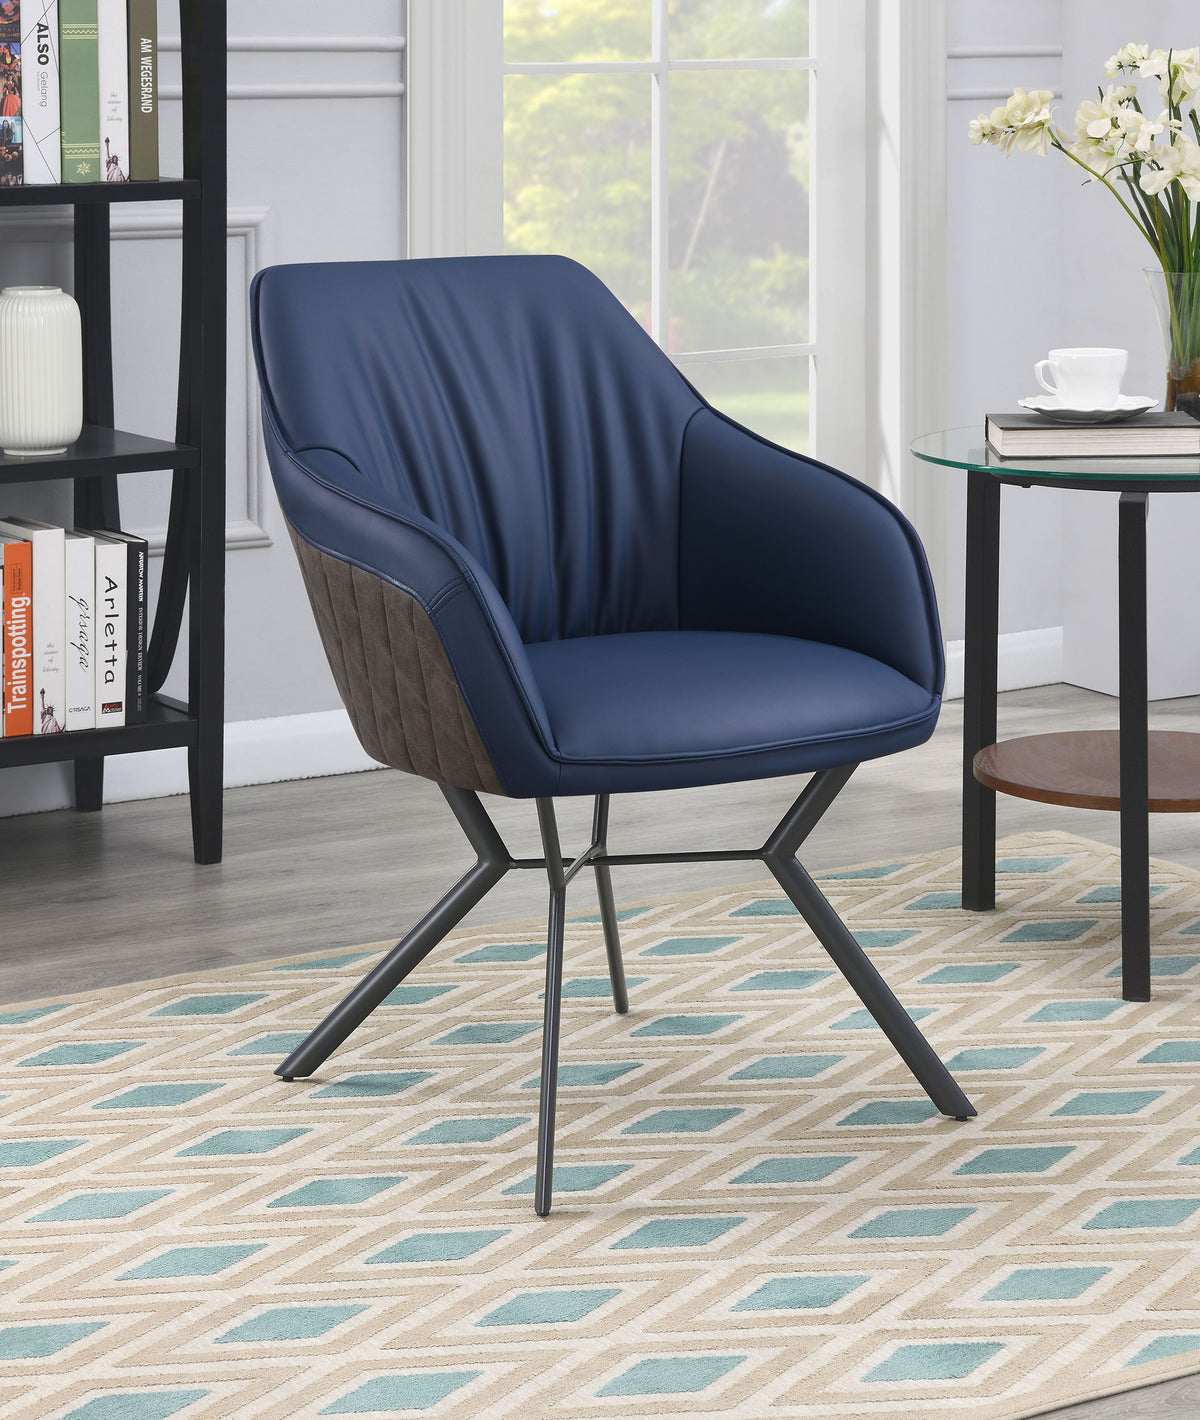 Mayer Upholstered Tufted Side Chairs (Set of 2) Blue and Brown Mayer Upholstered Tufted Side Chairs (Set of 2) Blue and Brown Half Price Furniture